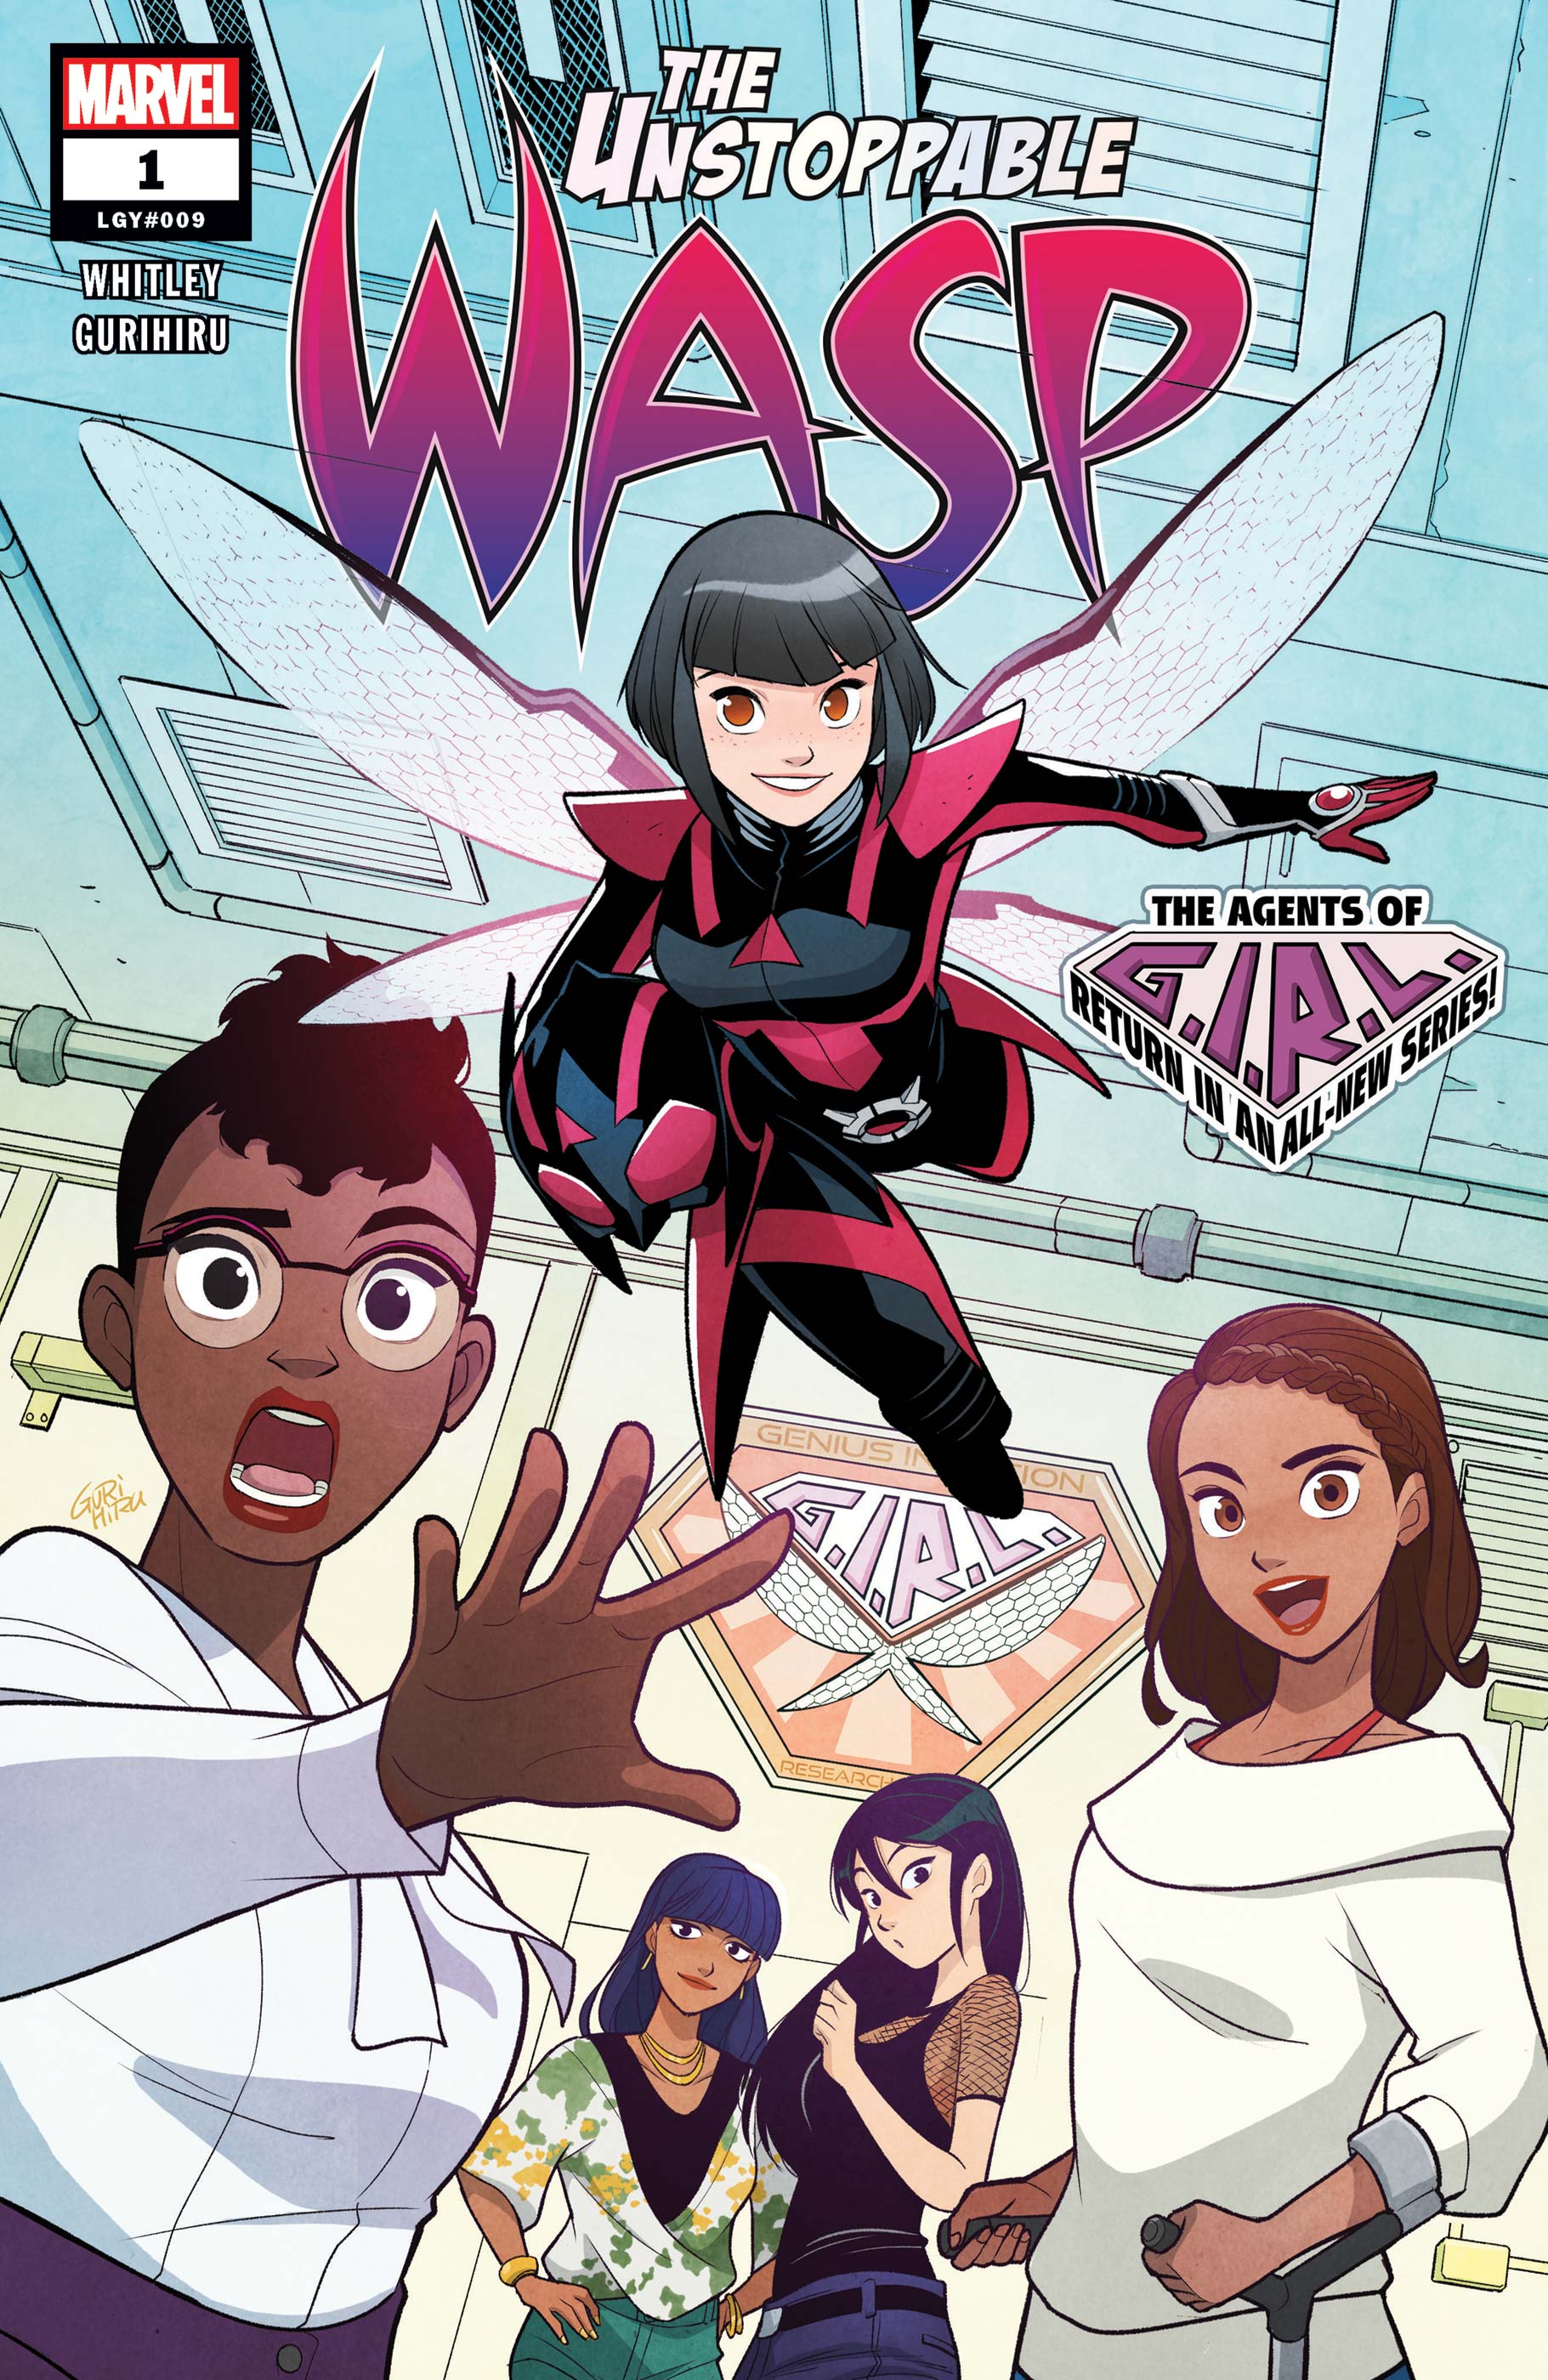 The Unstoppable Wasp (2018) #1